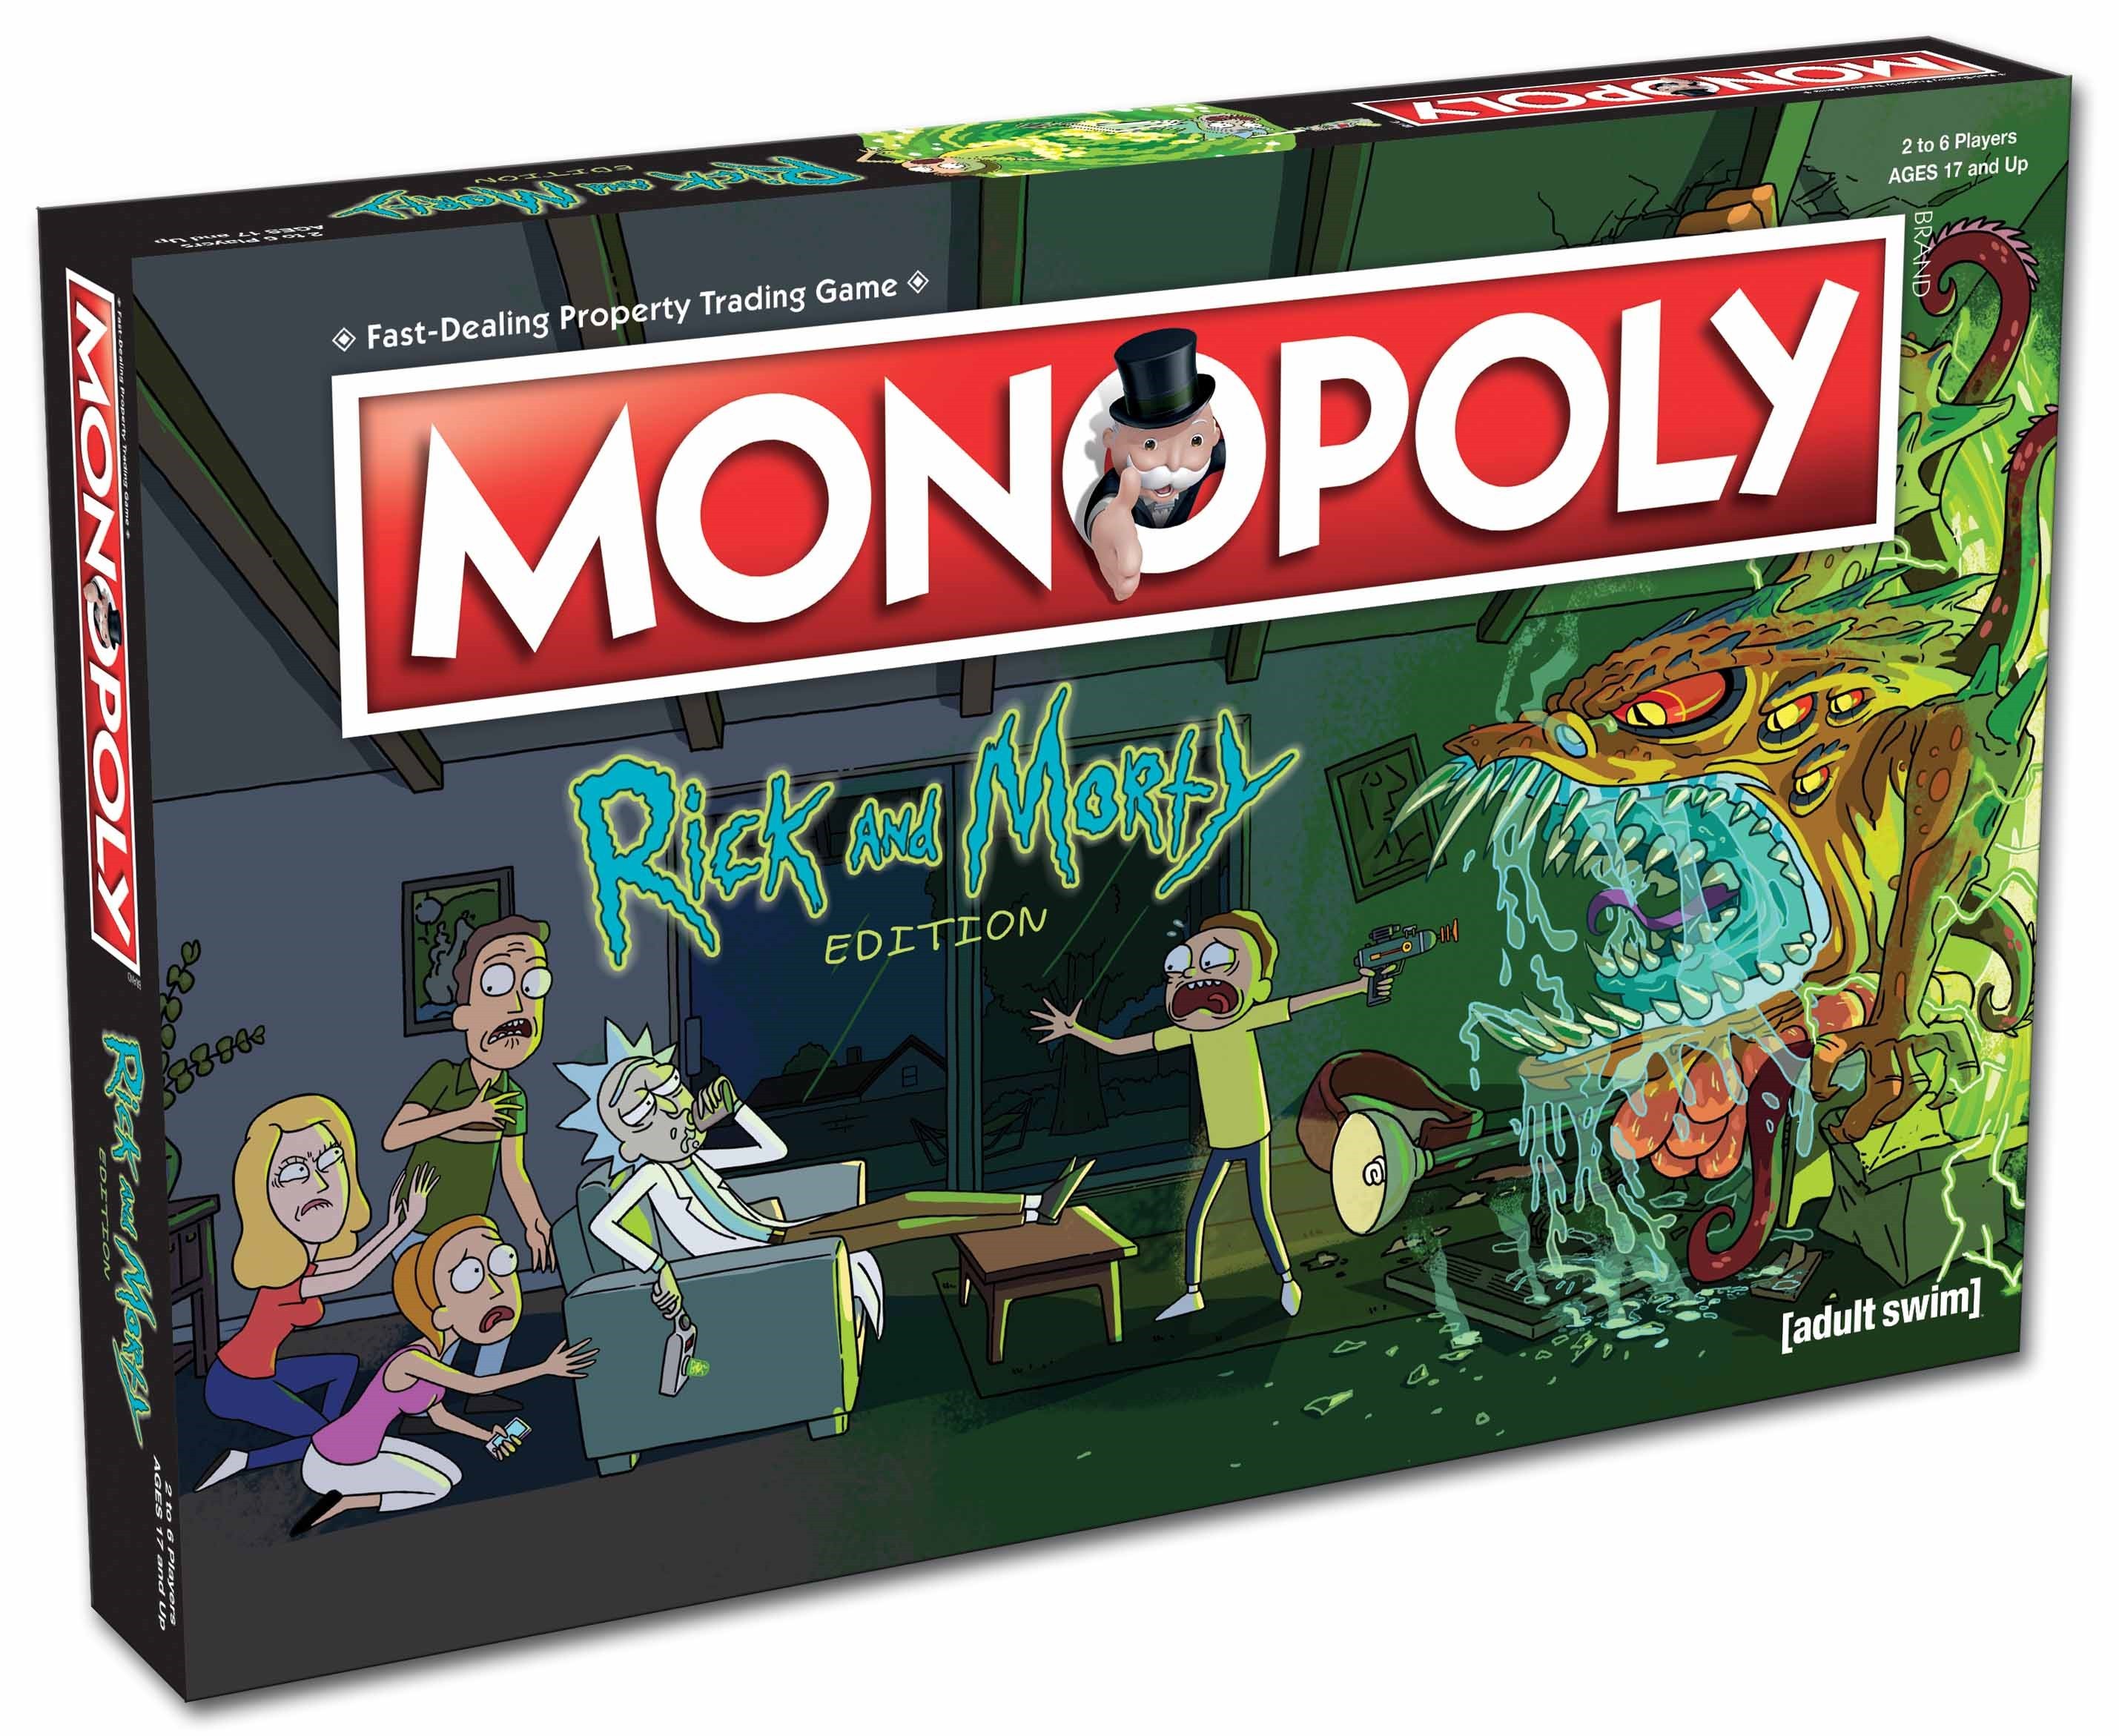 Monopoly: Rick and Morty